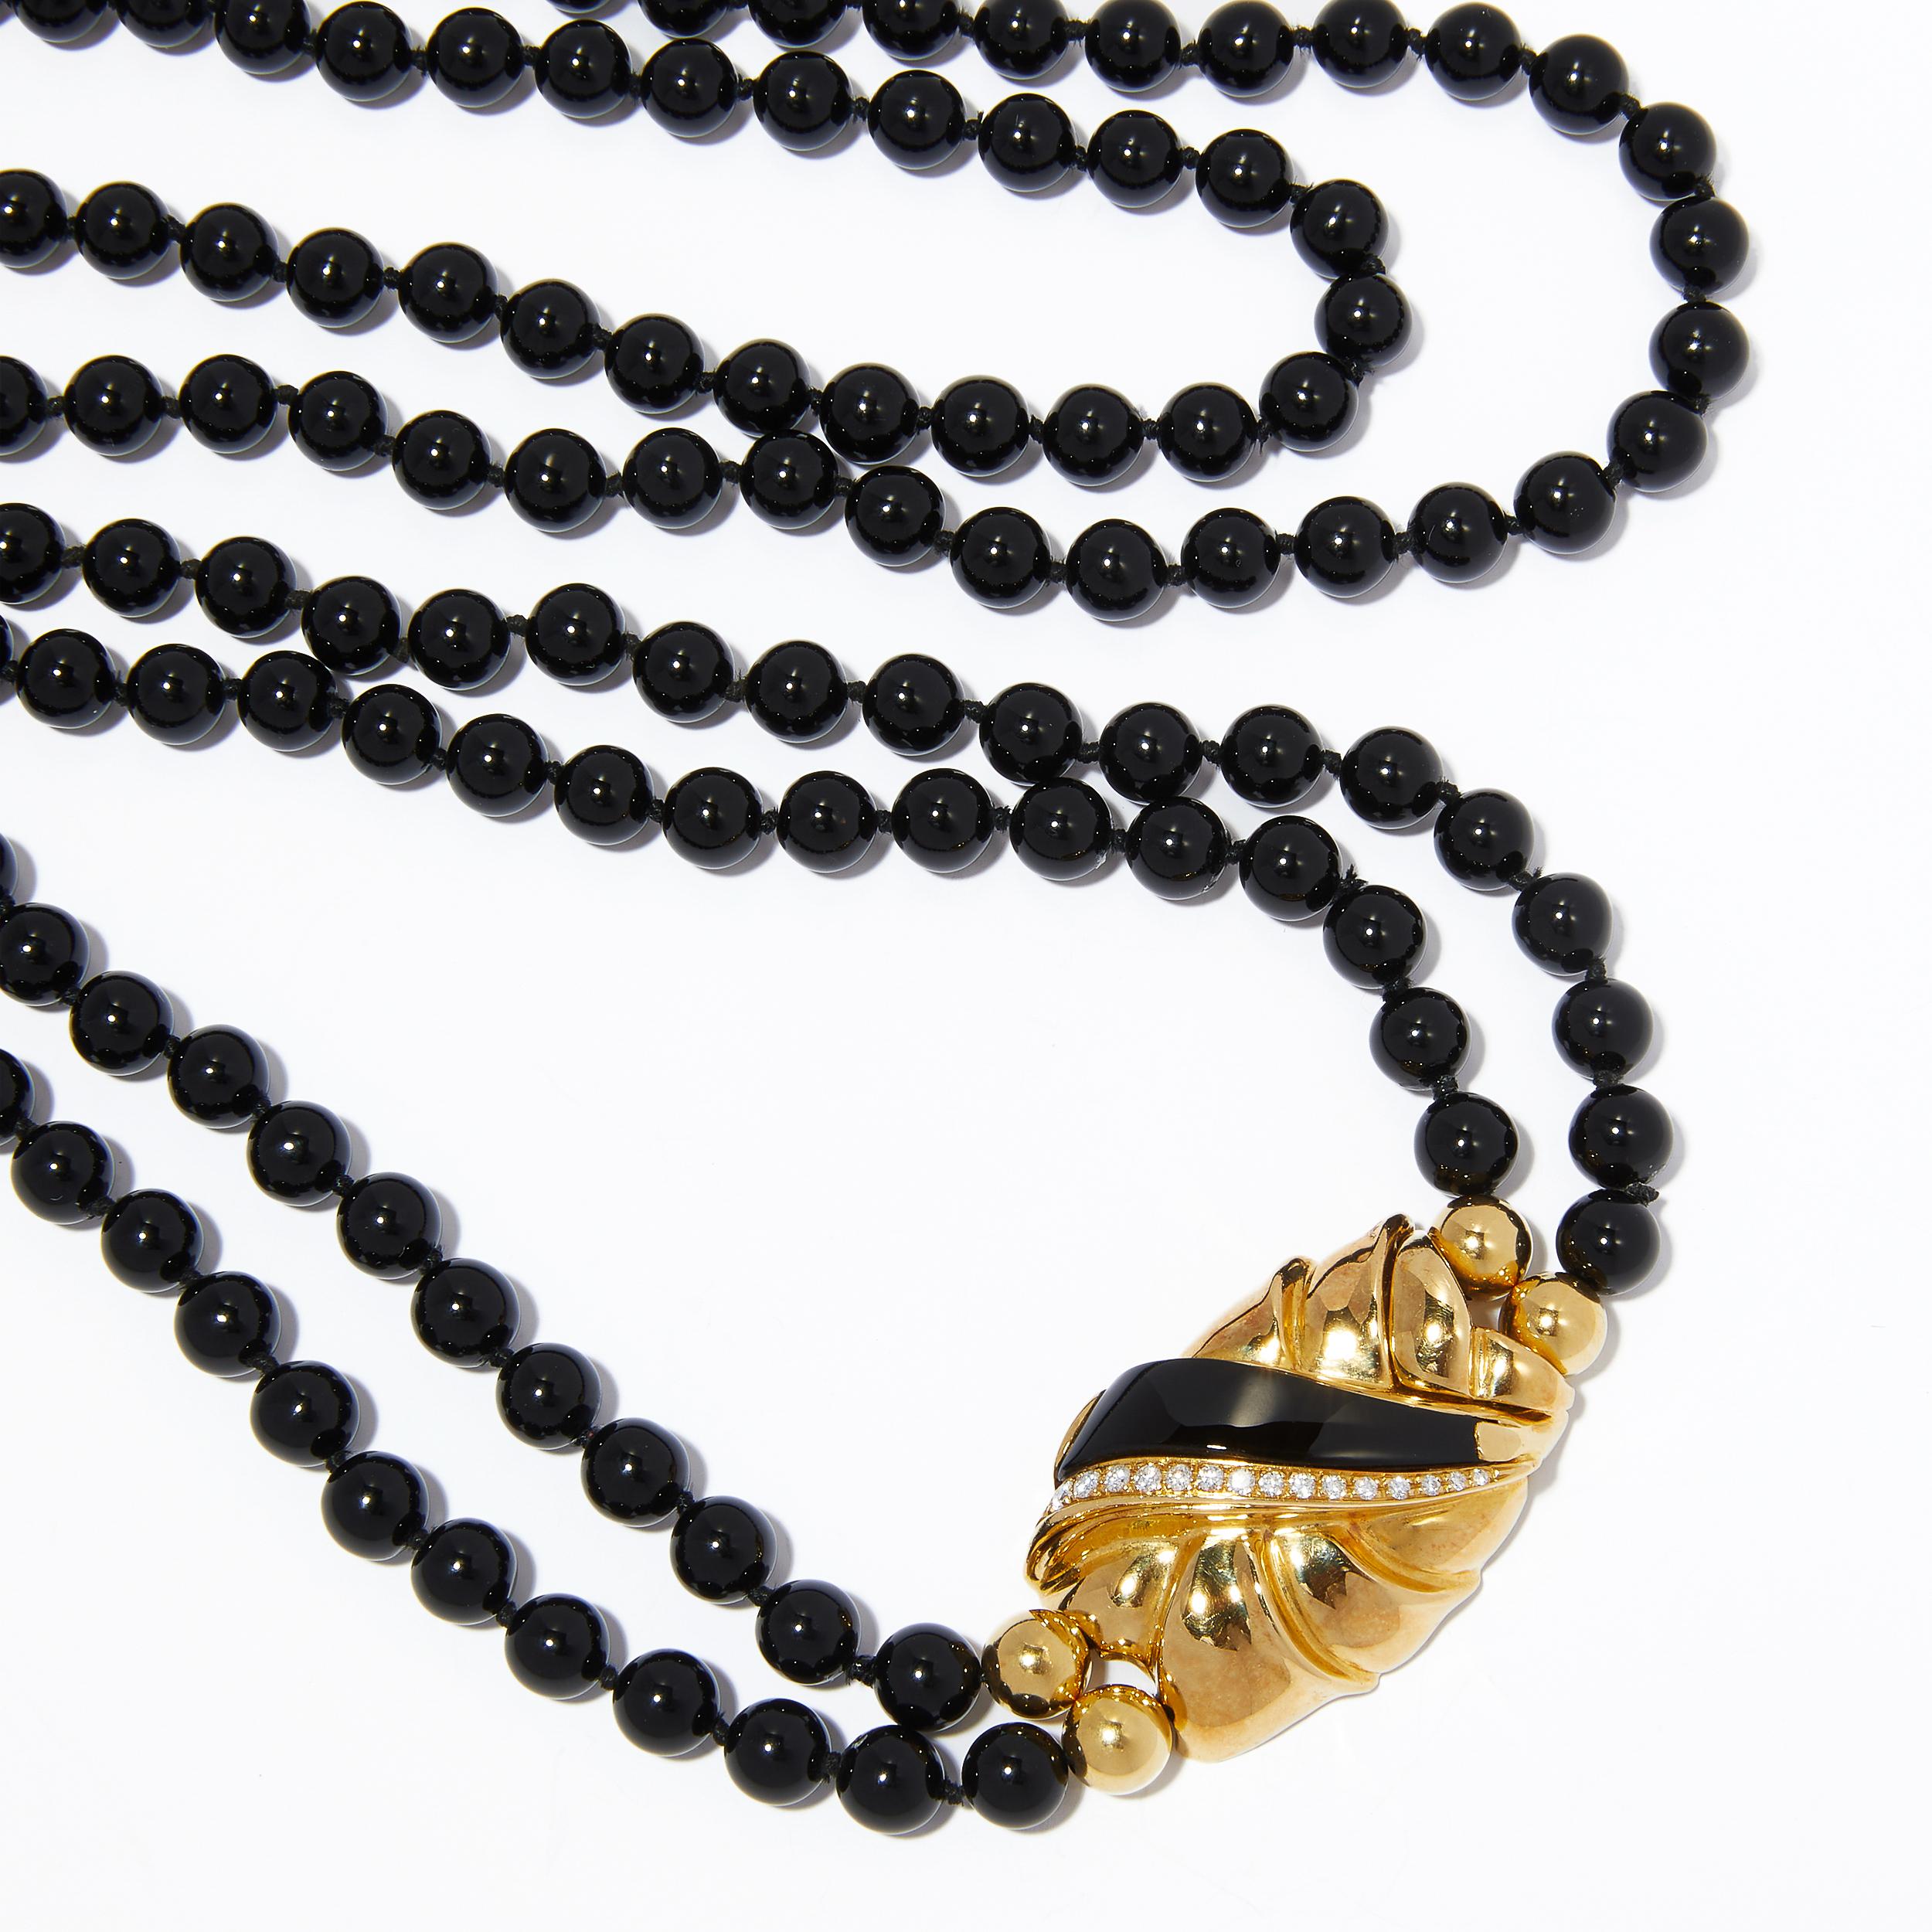 Double-Strand Black Onyx Beaded Necklace With 18ct Gold Clasp For Sale ...